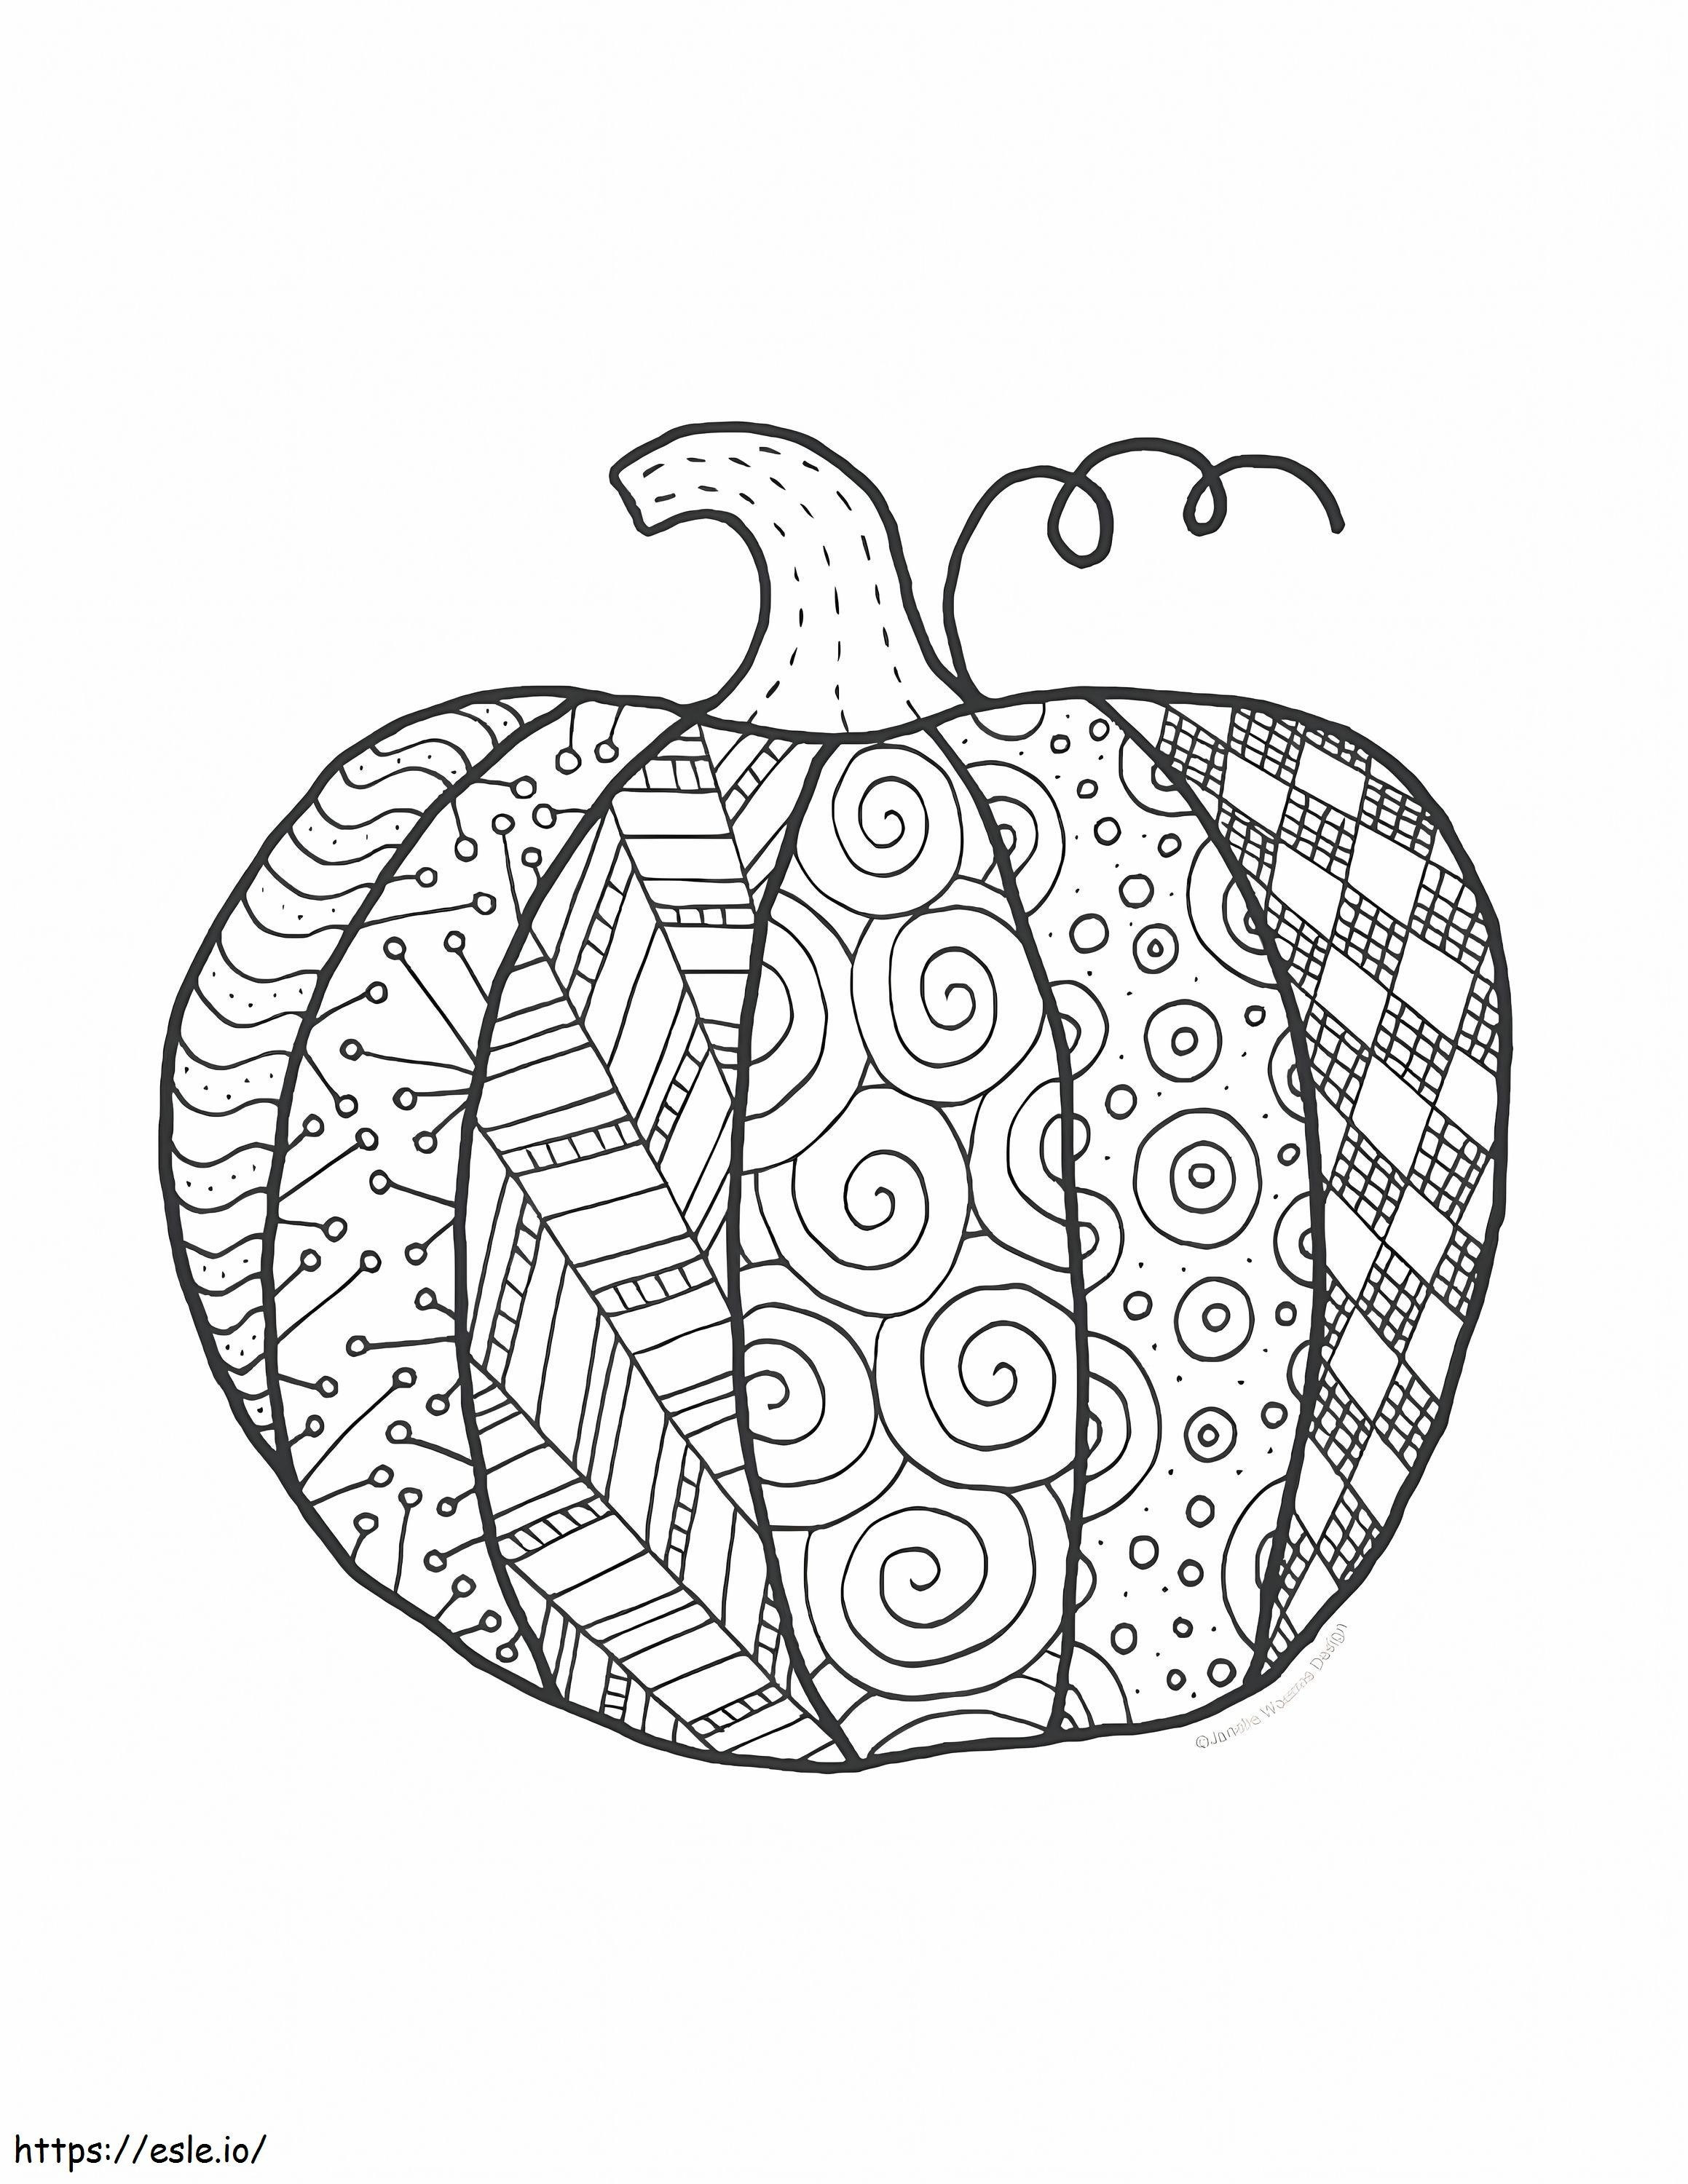 Pumpkin Is For Adults coloring page